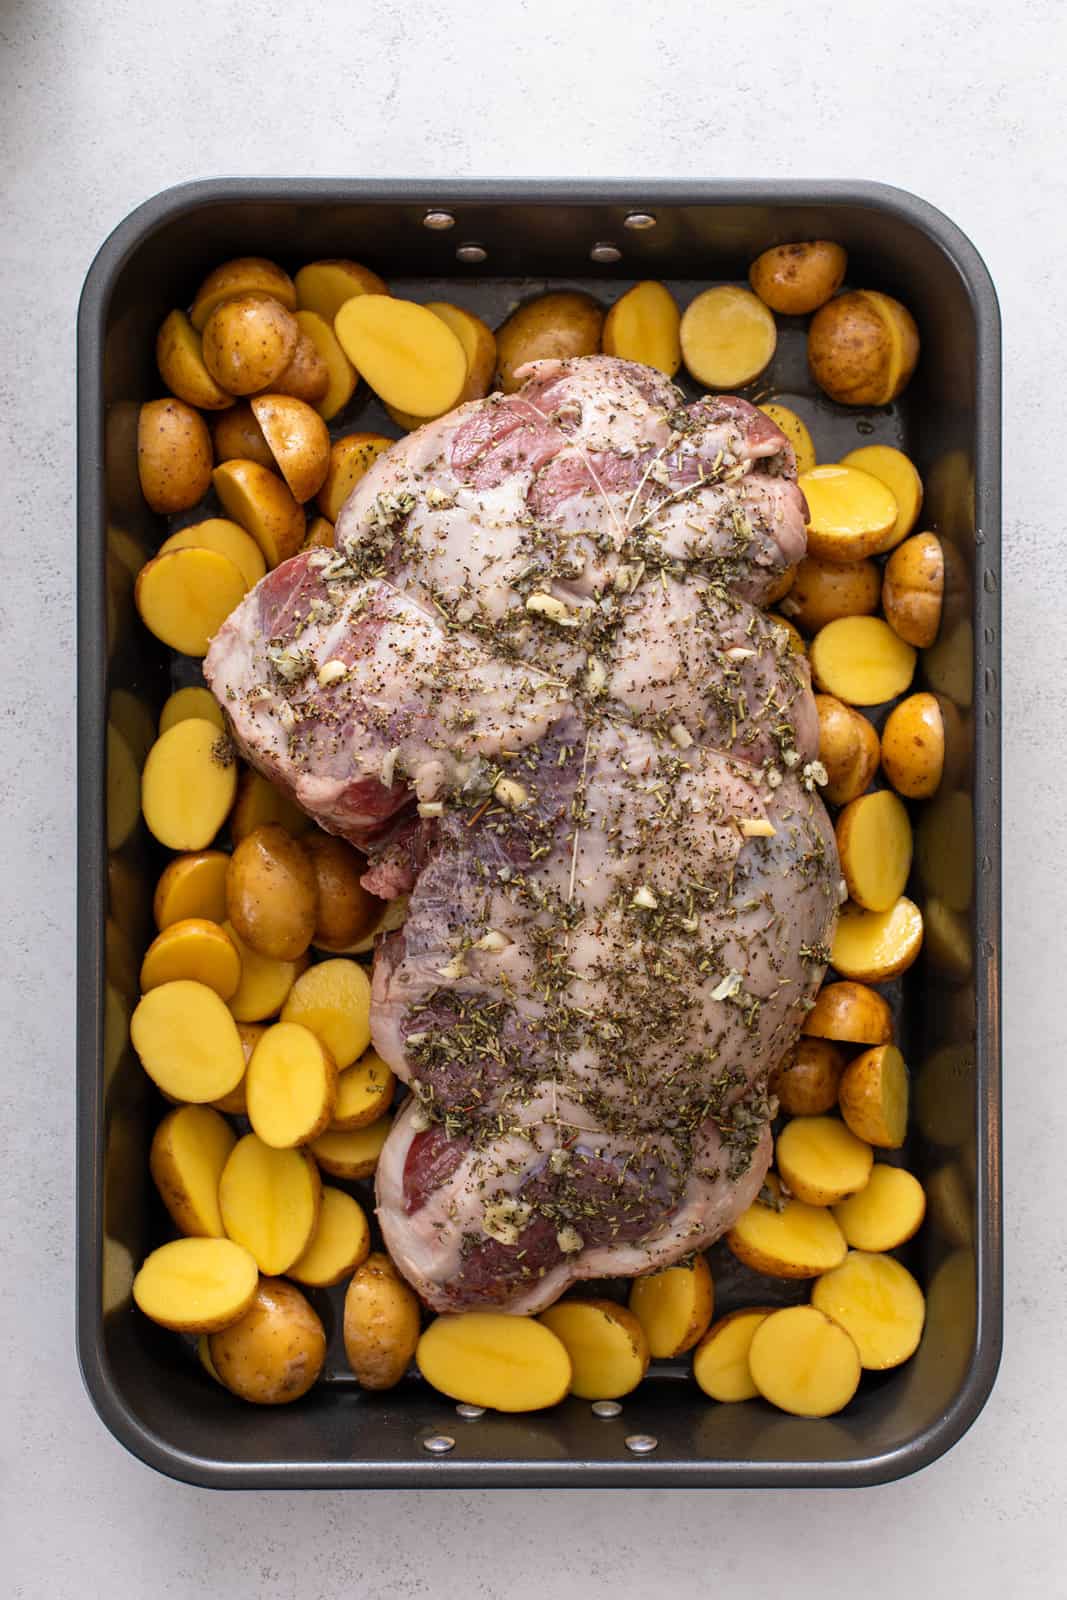 Boneless leg of lamb surrounded by potatoes in a roasting pan, ready to go in the oven.